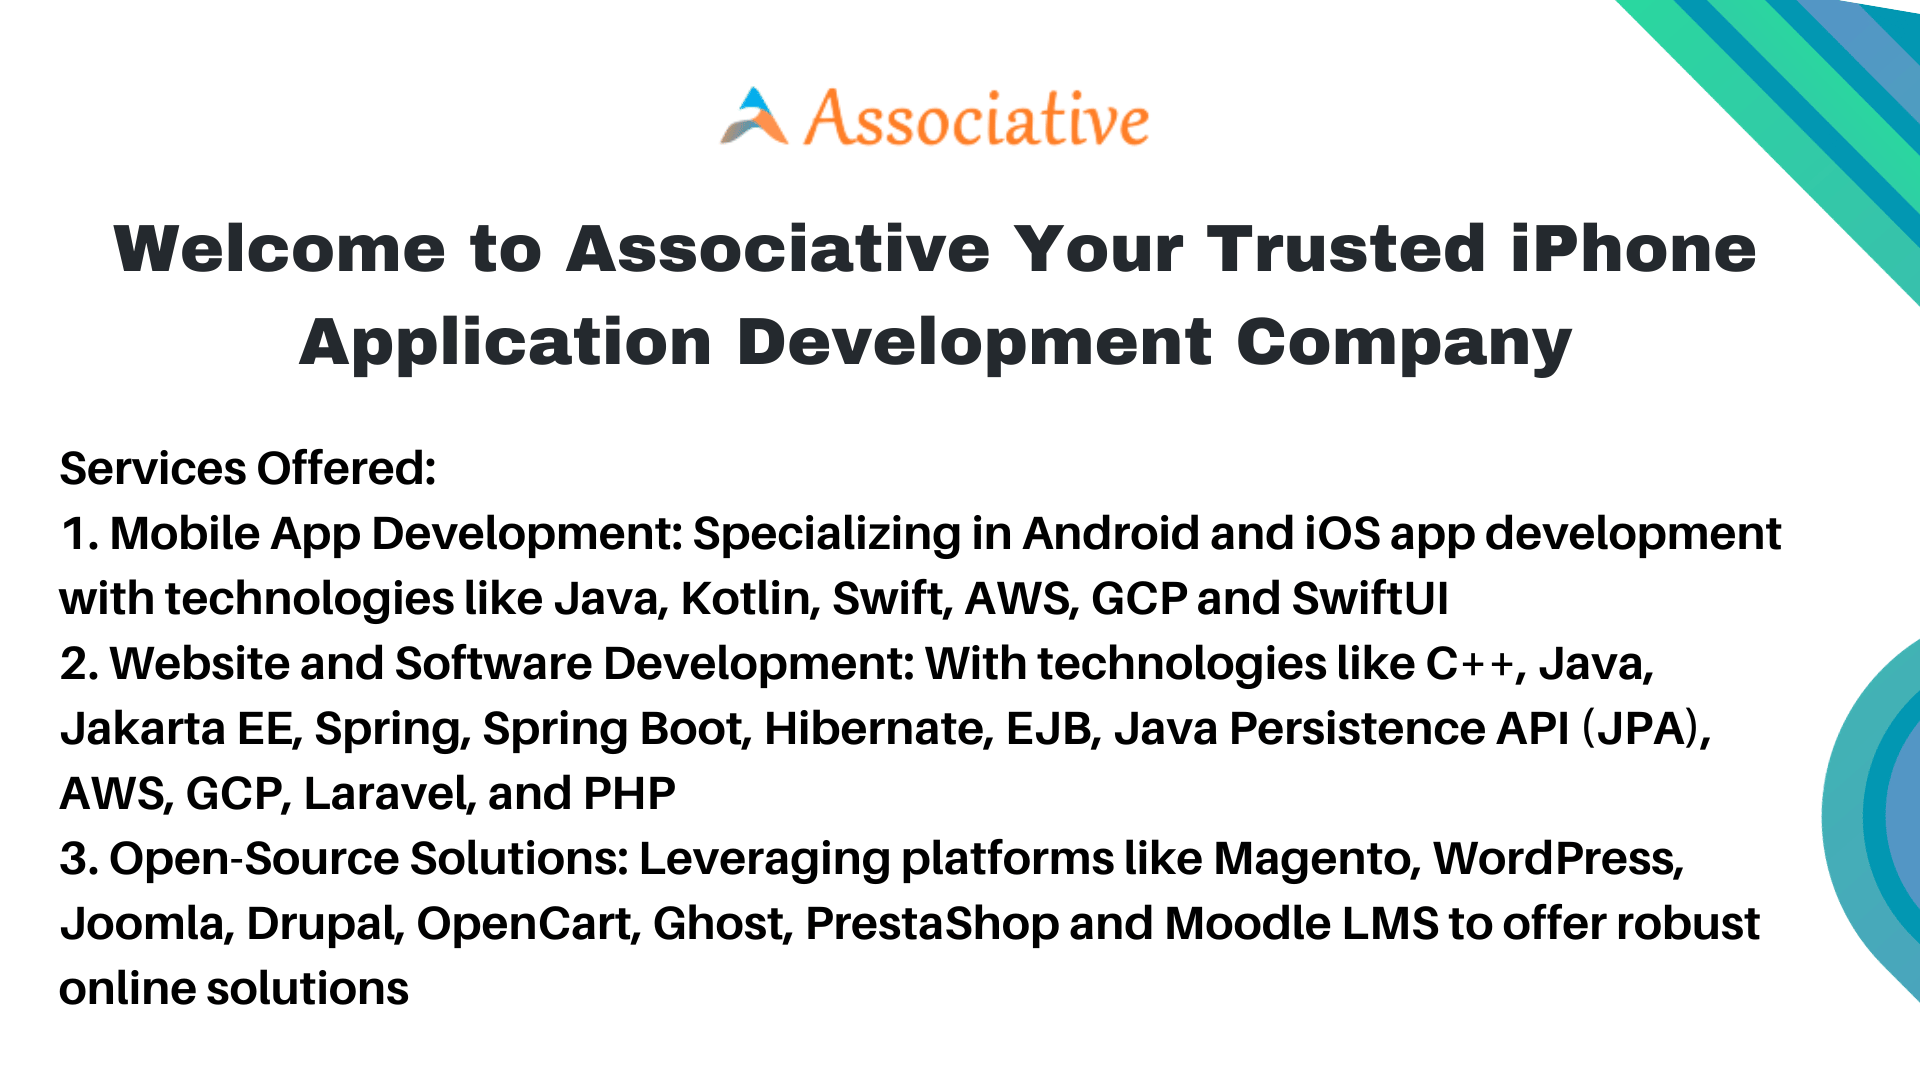 Welcome to Associative Your Trusted iPhone Application Development Company